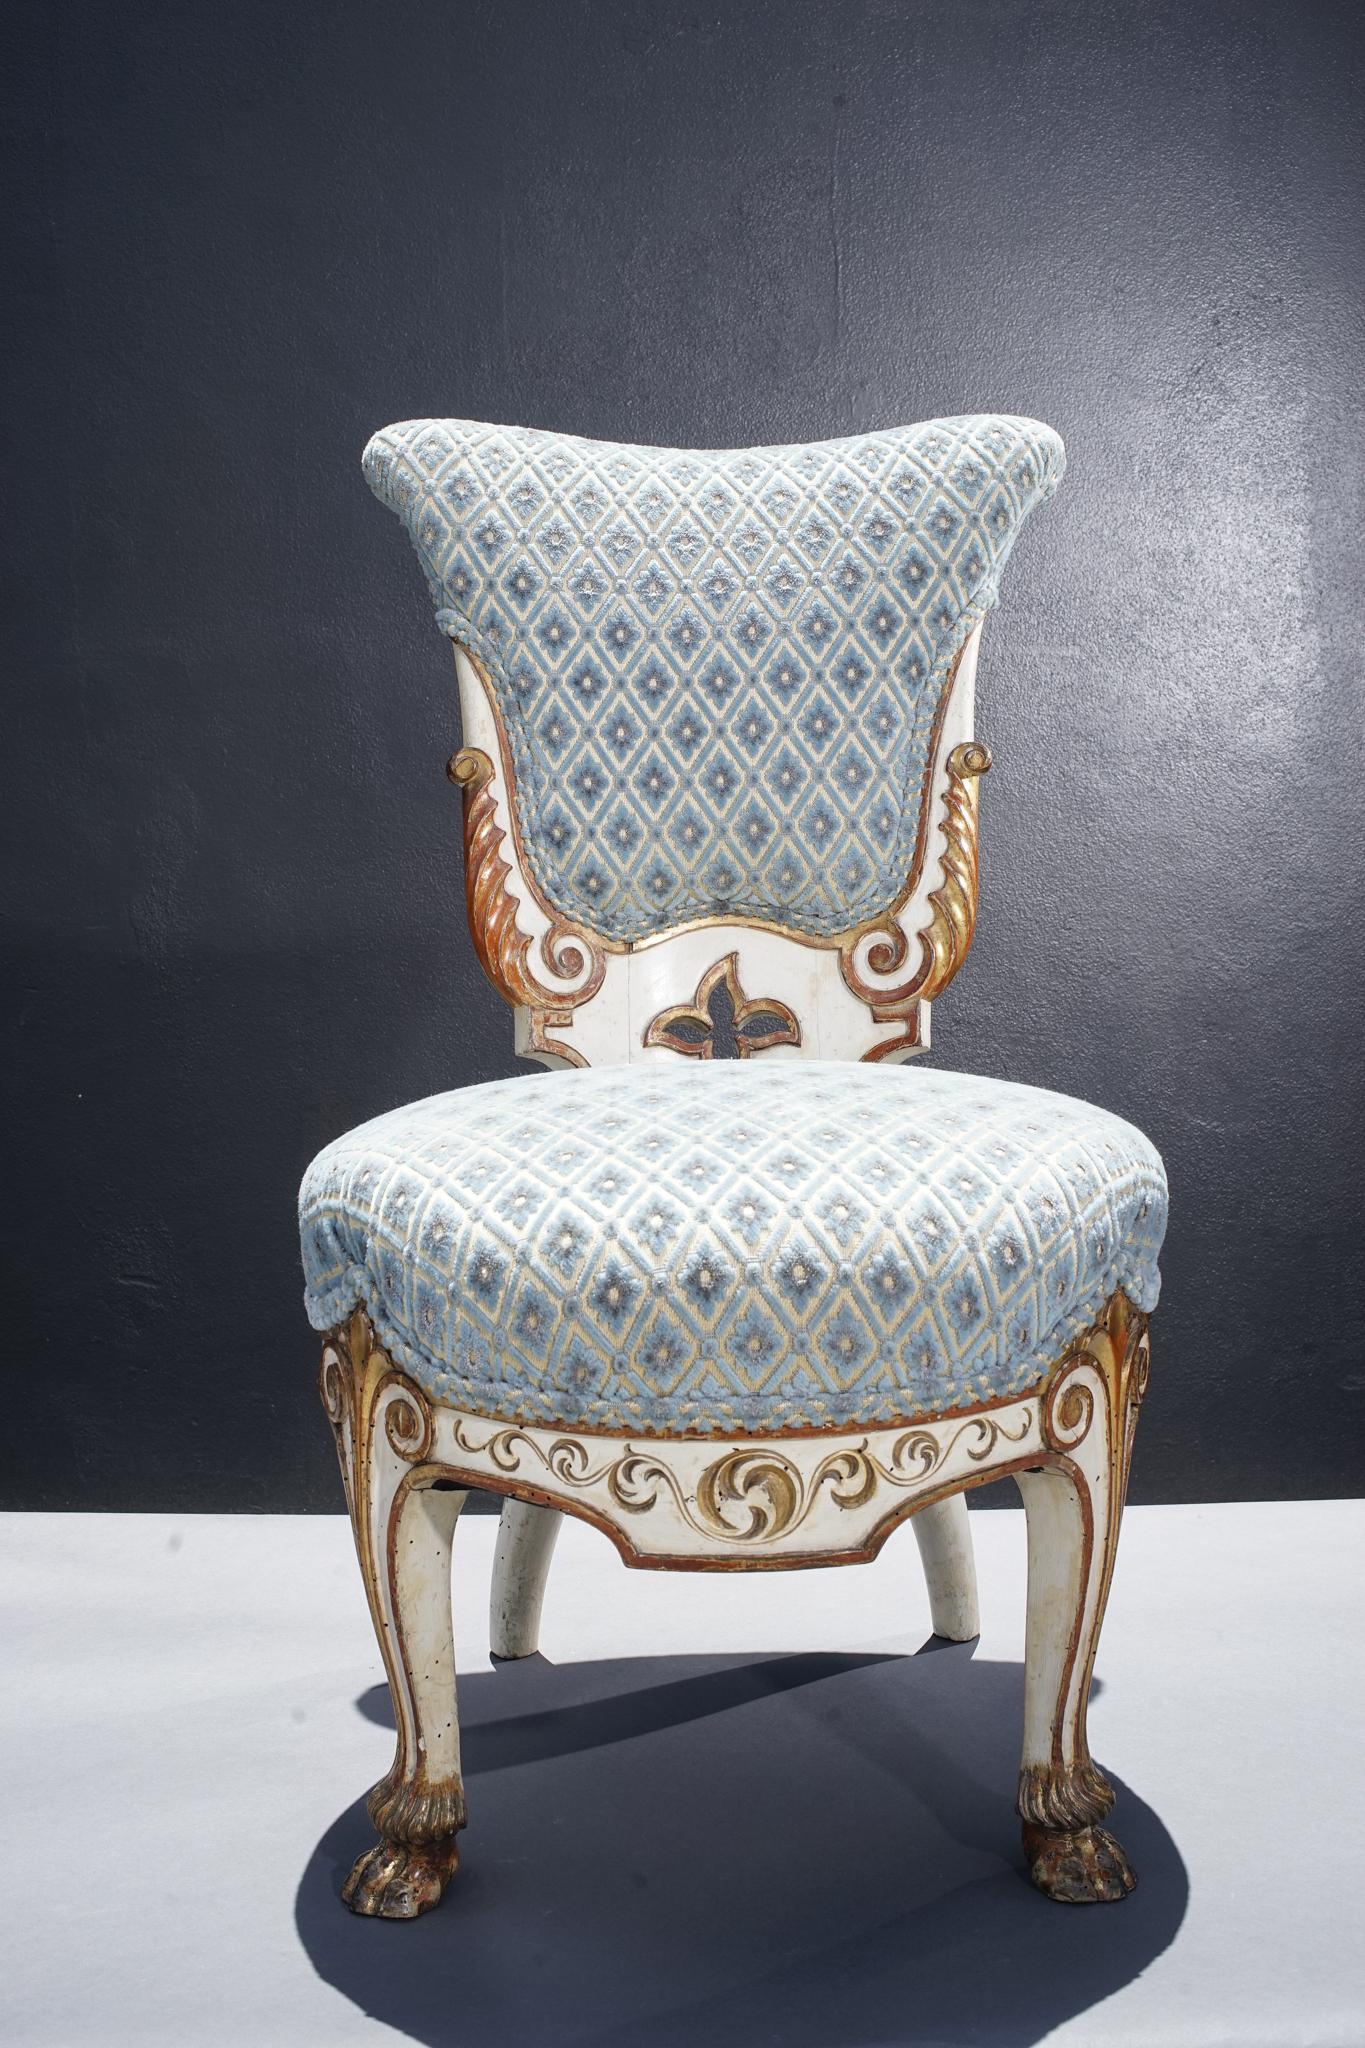 Pair of 19th century Italian giltwood and painted side chairs. Finely carved details with paw feet.